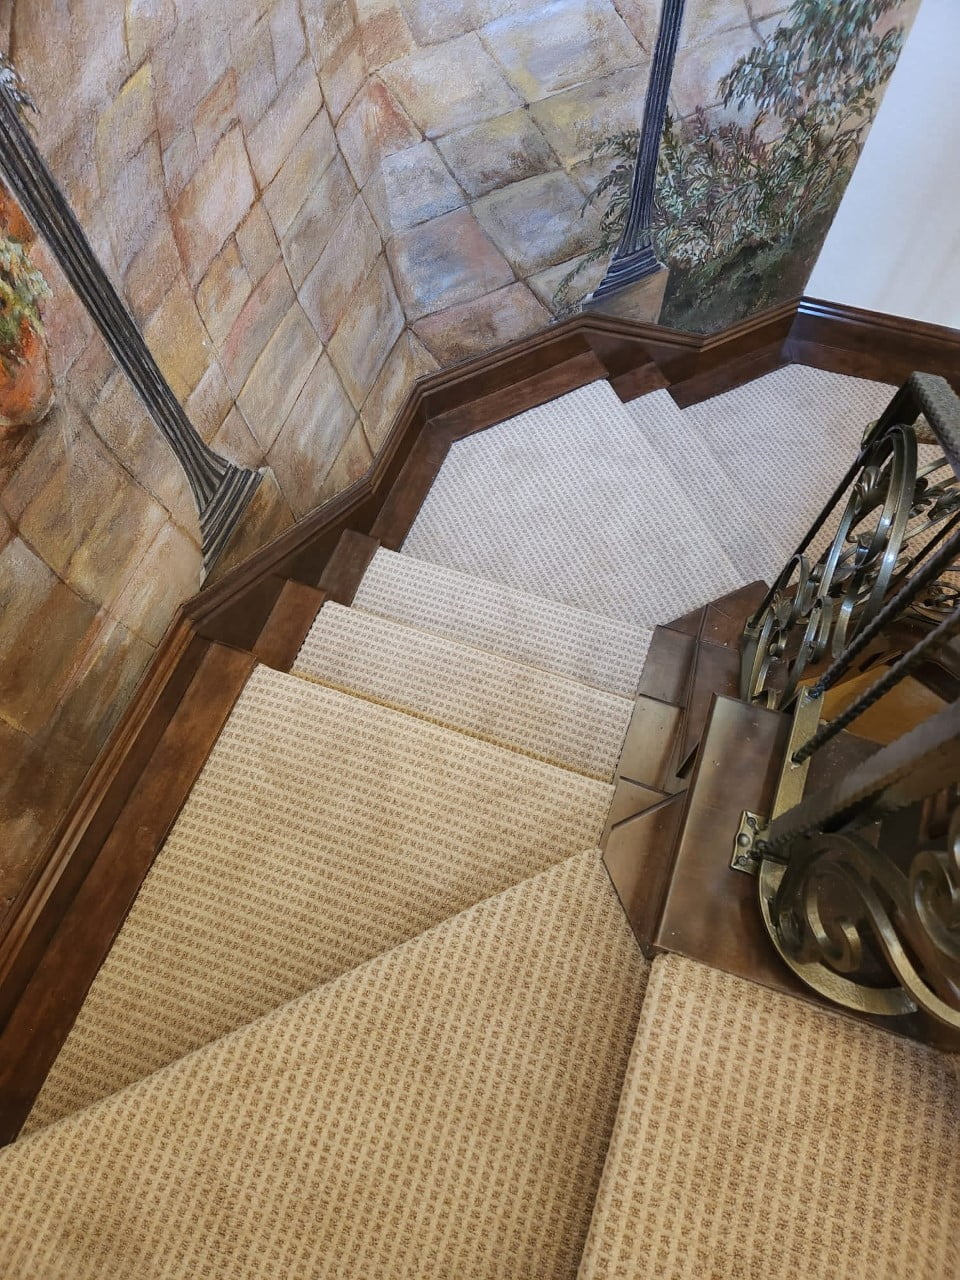 Stair Carpet Floor By Maximo